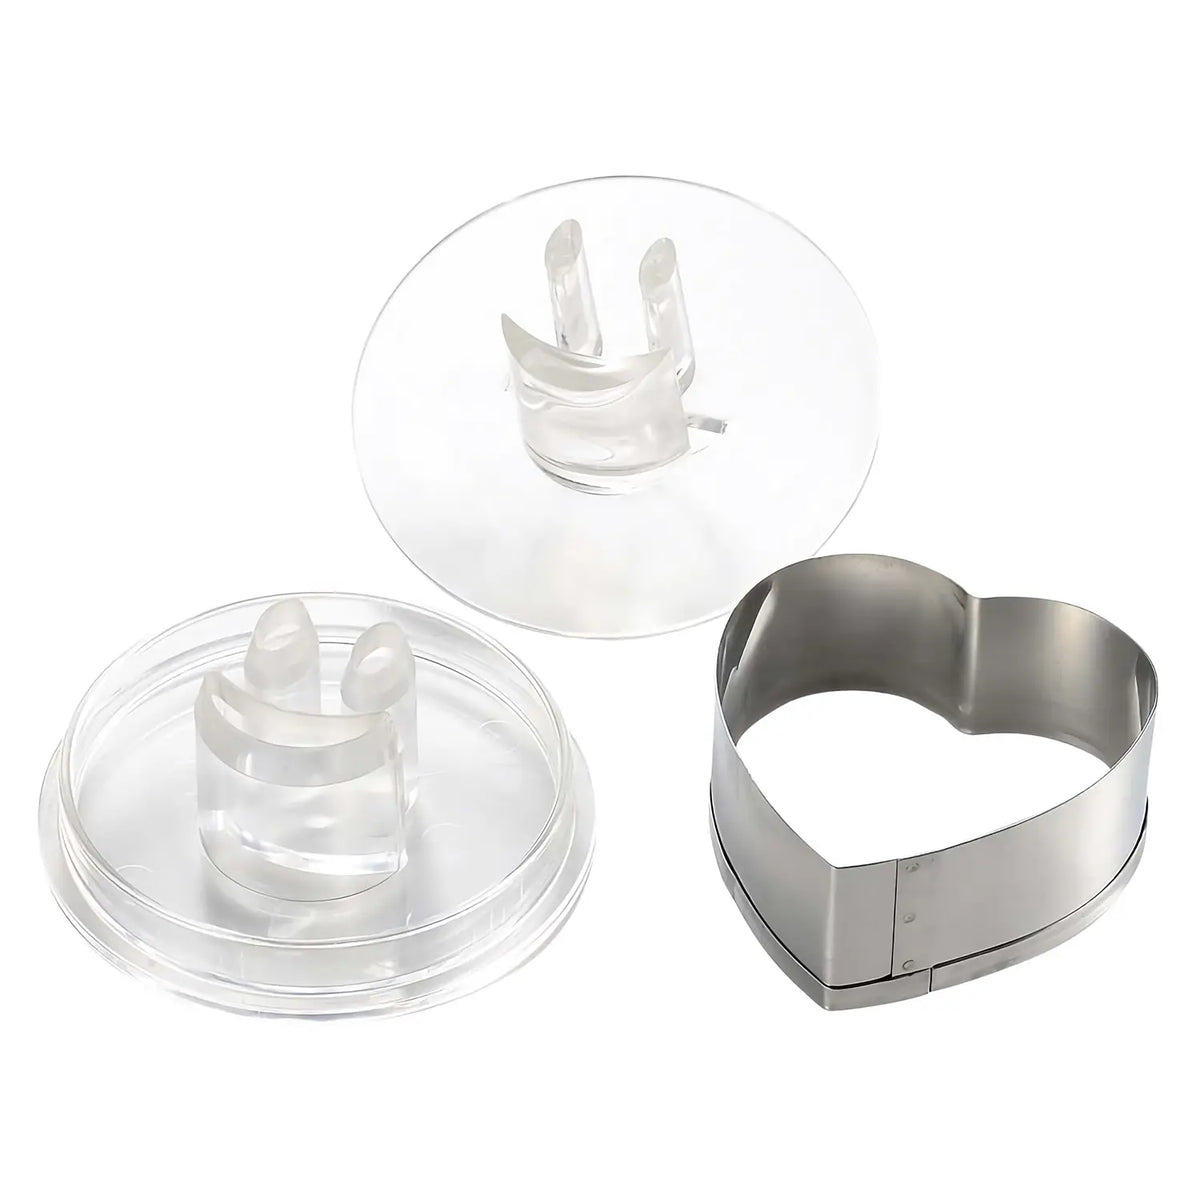 TIGERCROWN Cake Land Stainless Steel Heart Cookie Cutter